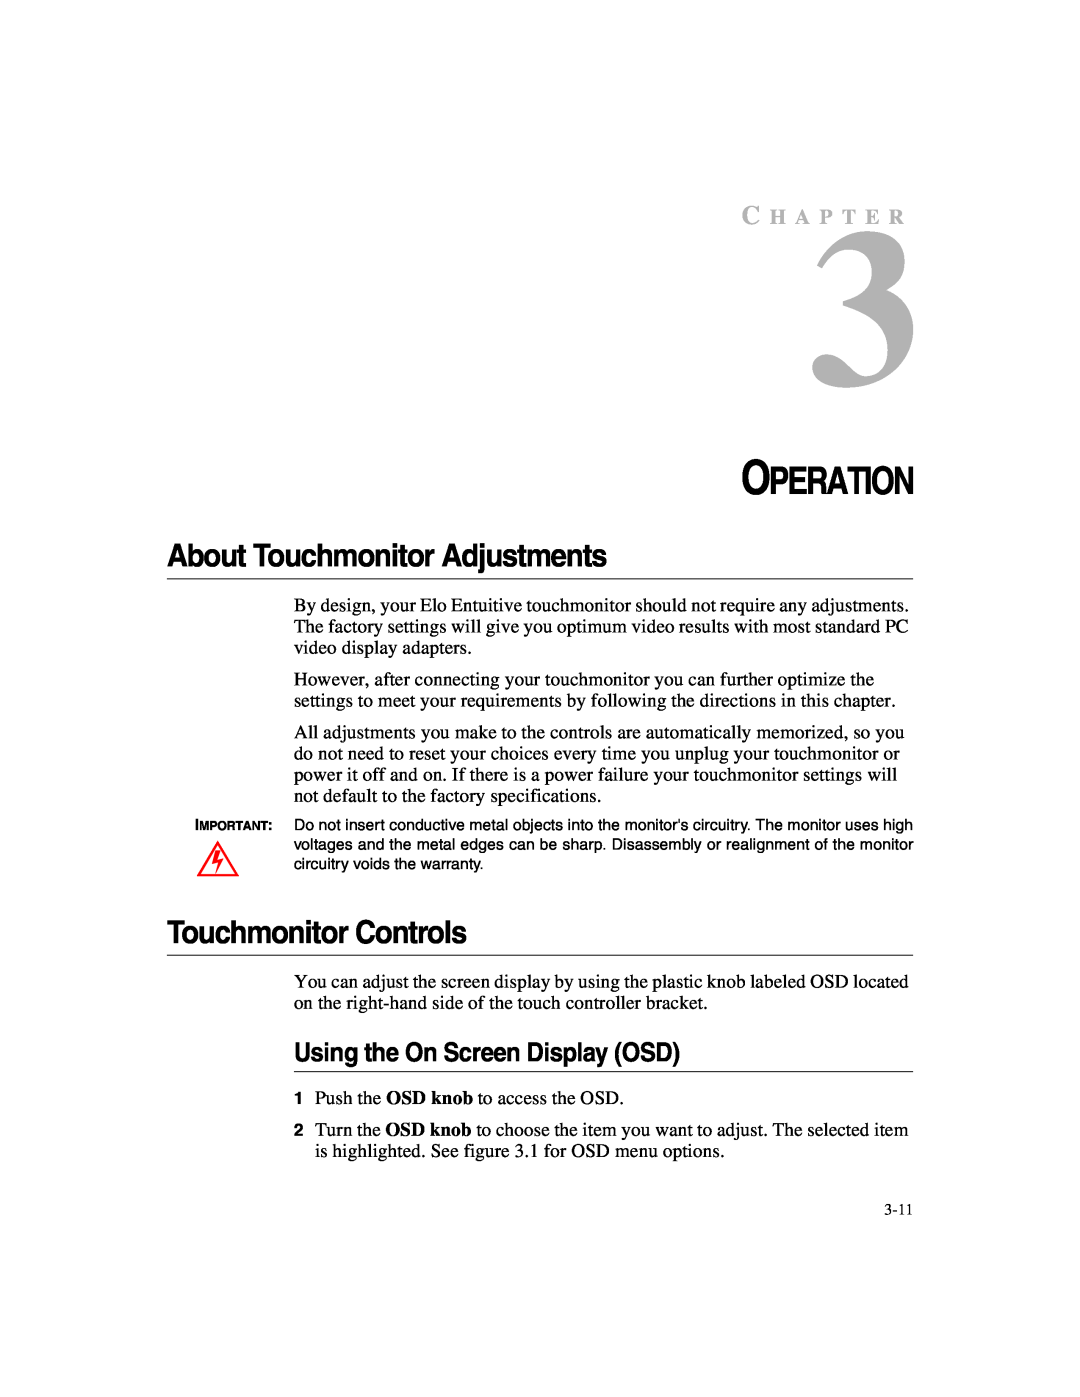 Elo TouchSystems ET2187C-4XWA-1 manual Operation, About Touchmonitor Adjustments, Touchmonitor Controls, C H A P T E R 